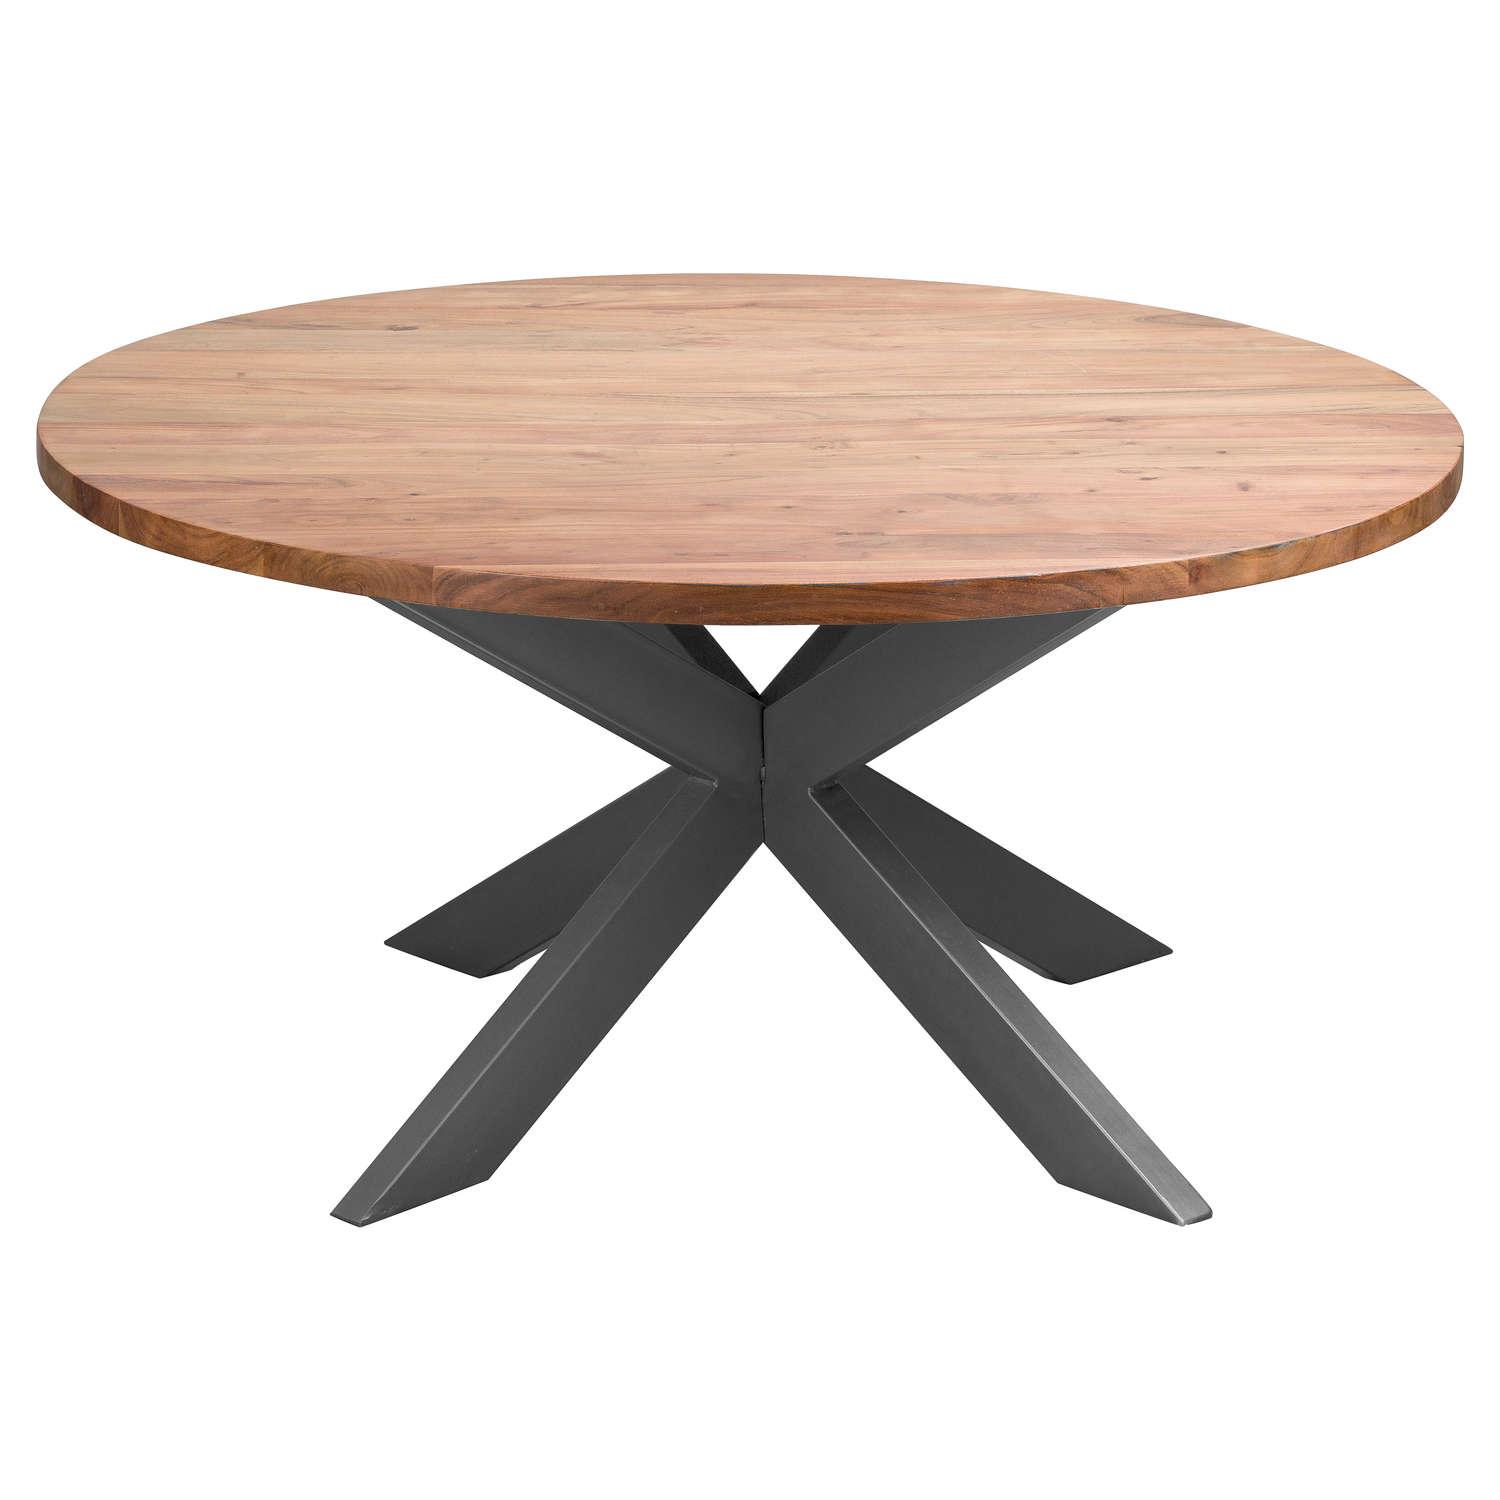 Live Edge Collection Large Round Dining Table - Vookoo Lifestyle